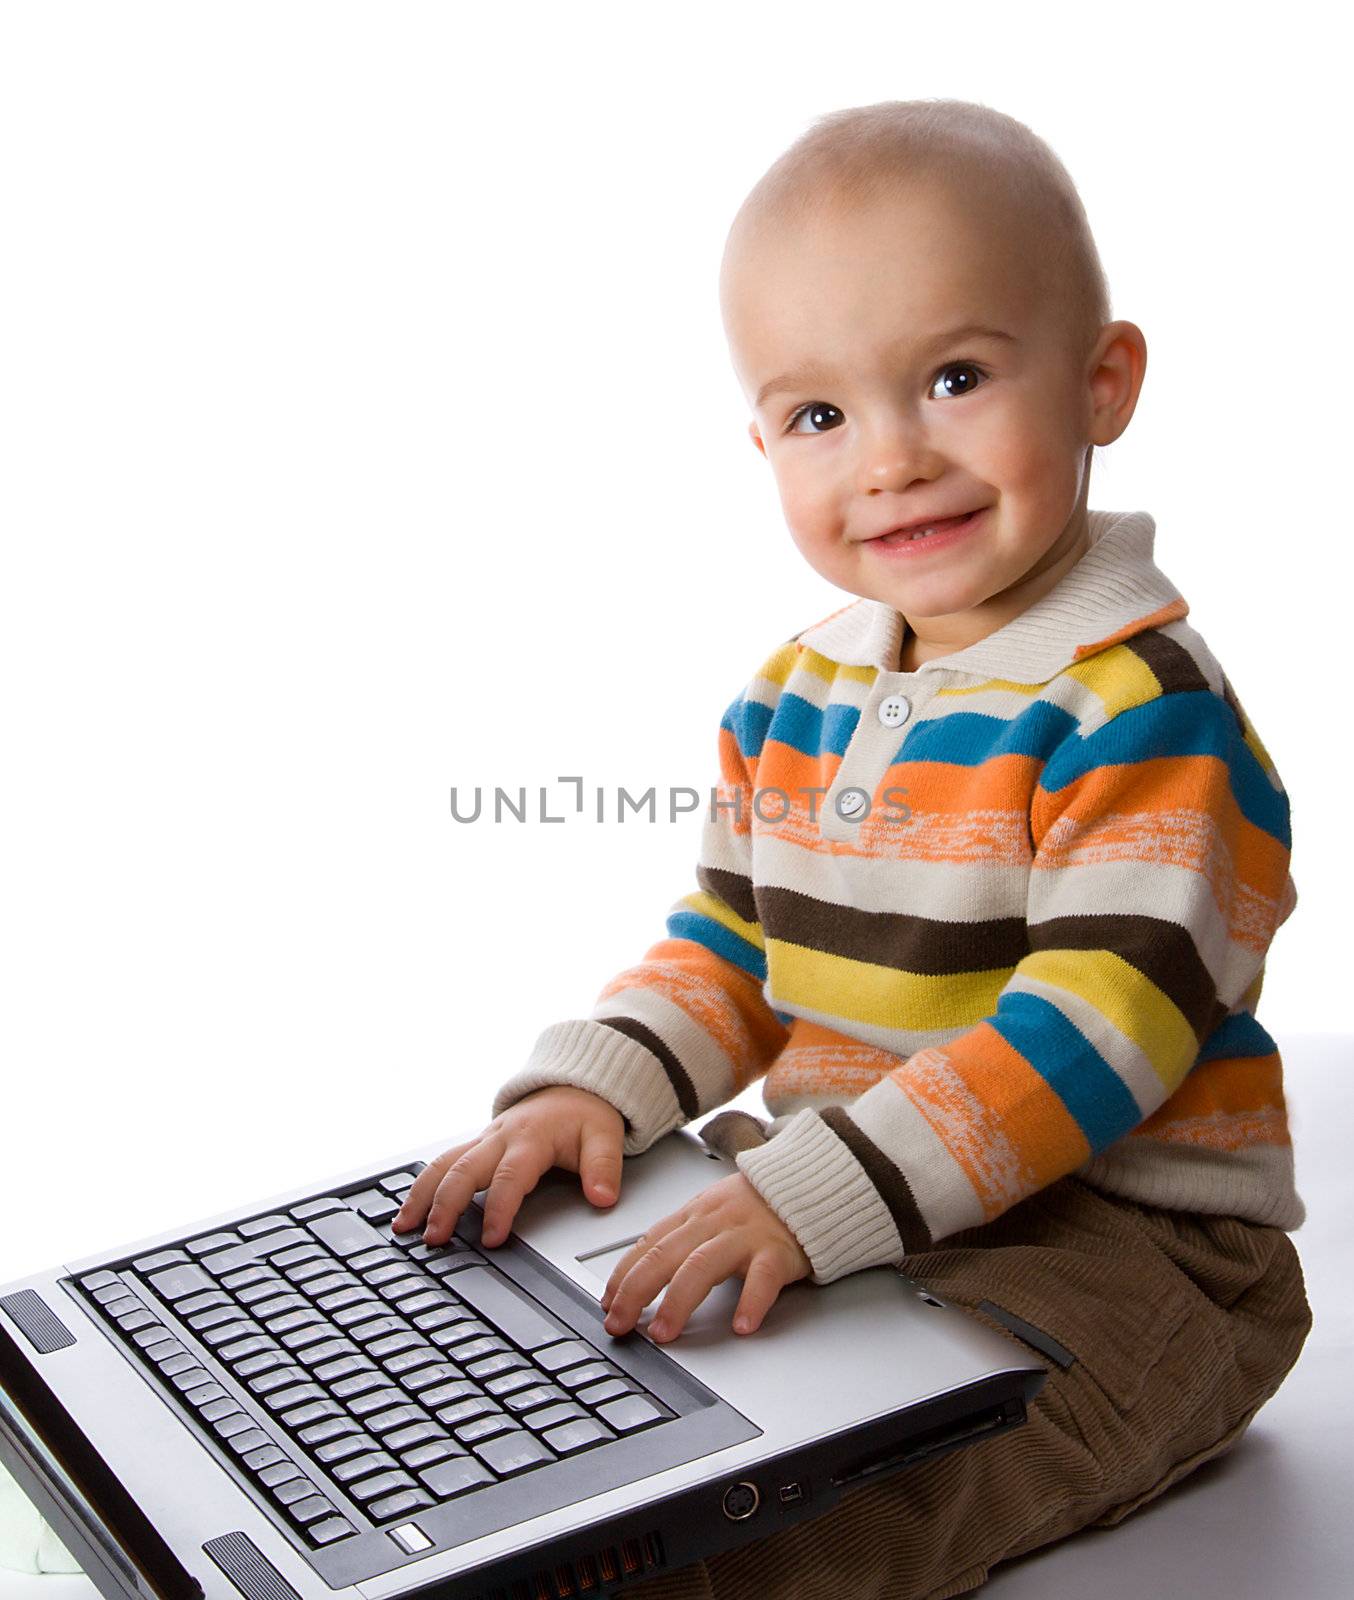 smiling little boy typing on laptop, isolated on white